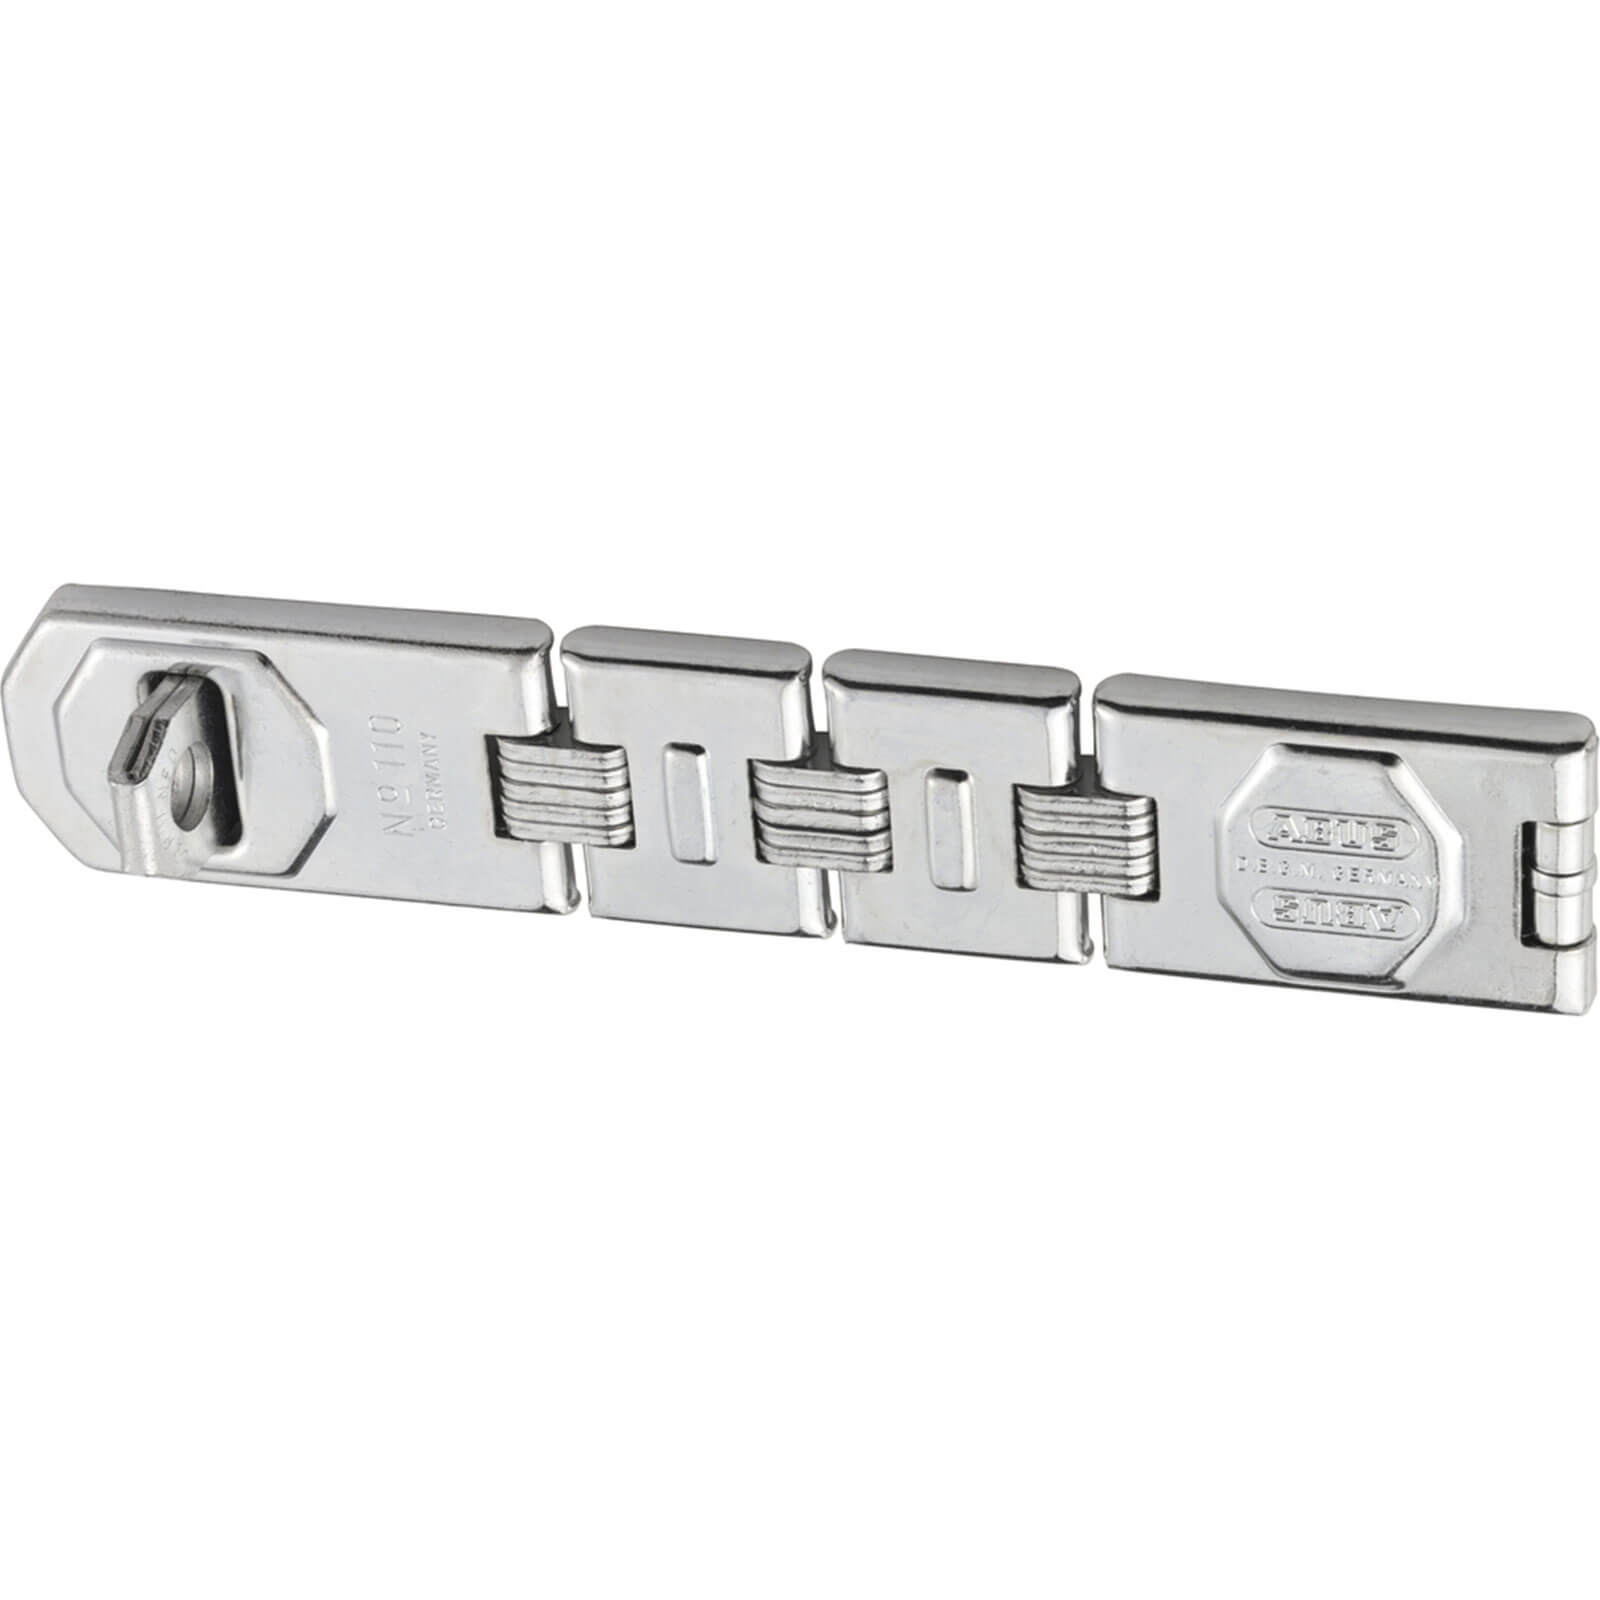 Image of Abus 110 Series Universal Hasp and Staple Double Jointed 230mm